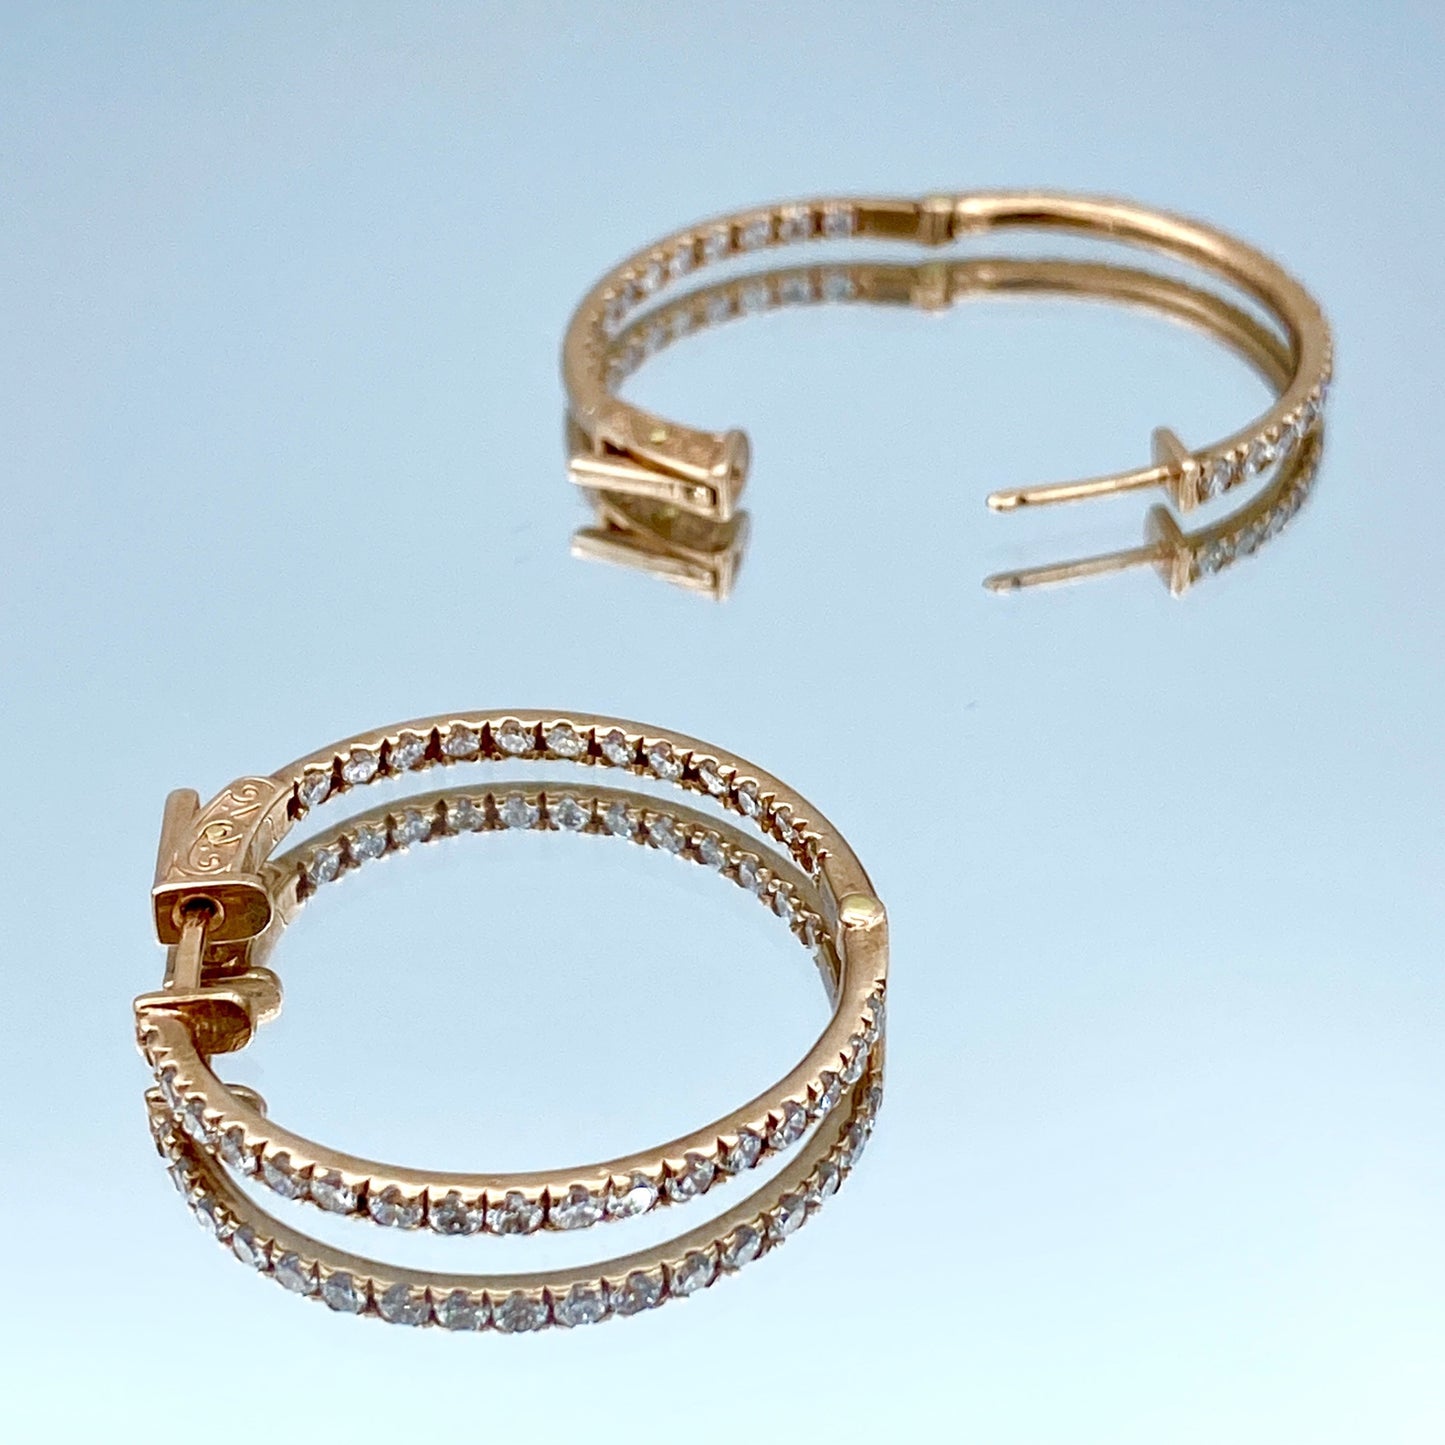 Inside-Out Diamond Hoop Earrings in 14K Rose Gold - L and L Jewelry